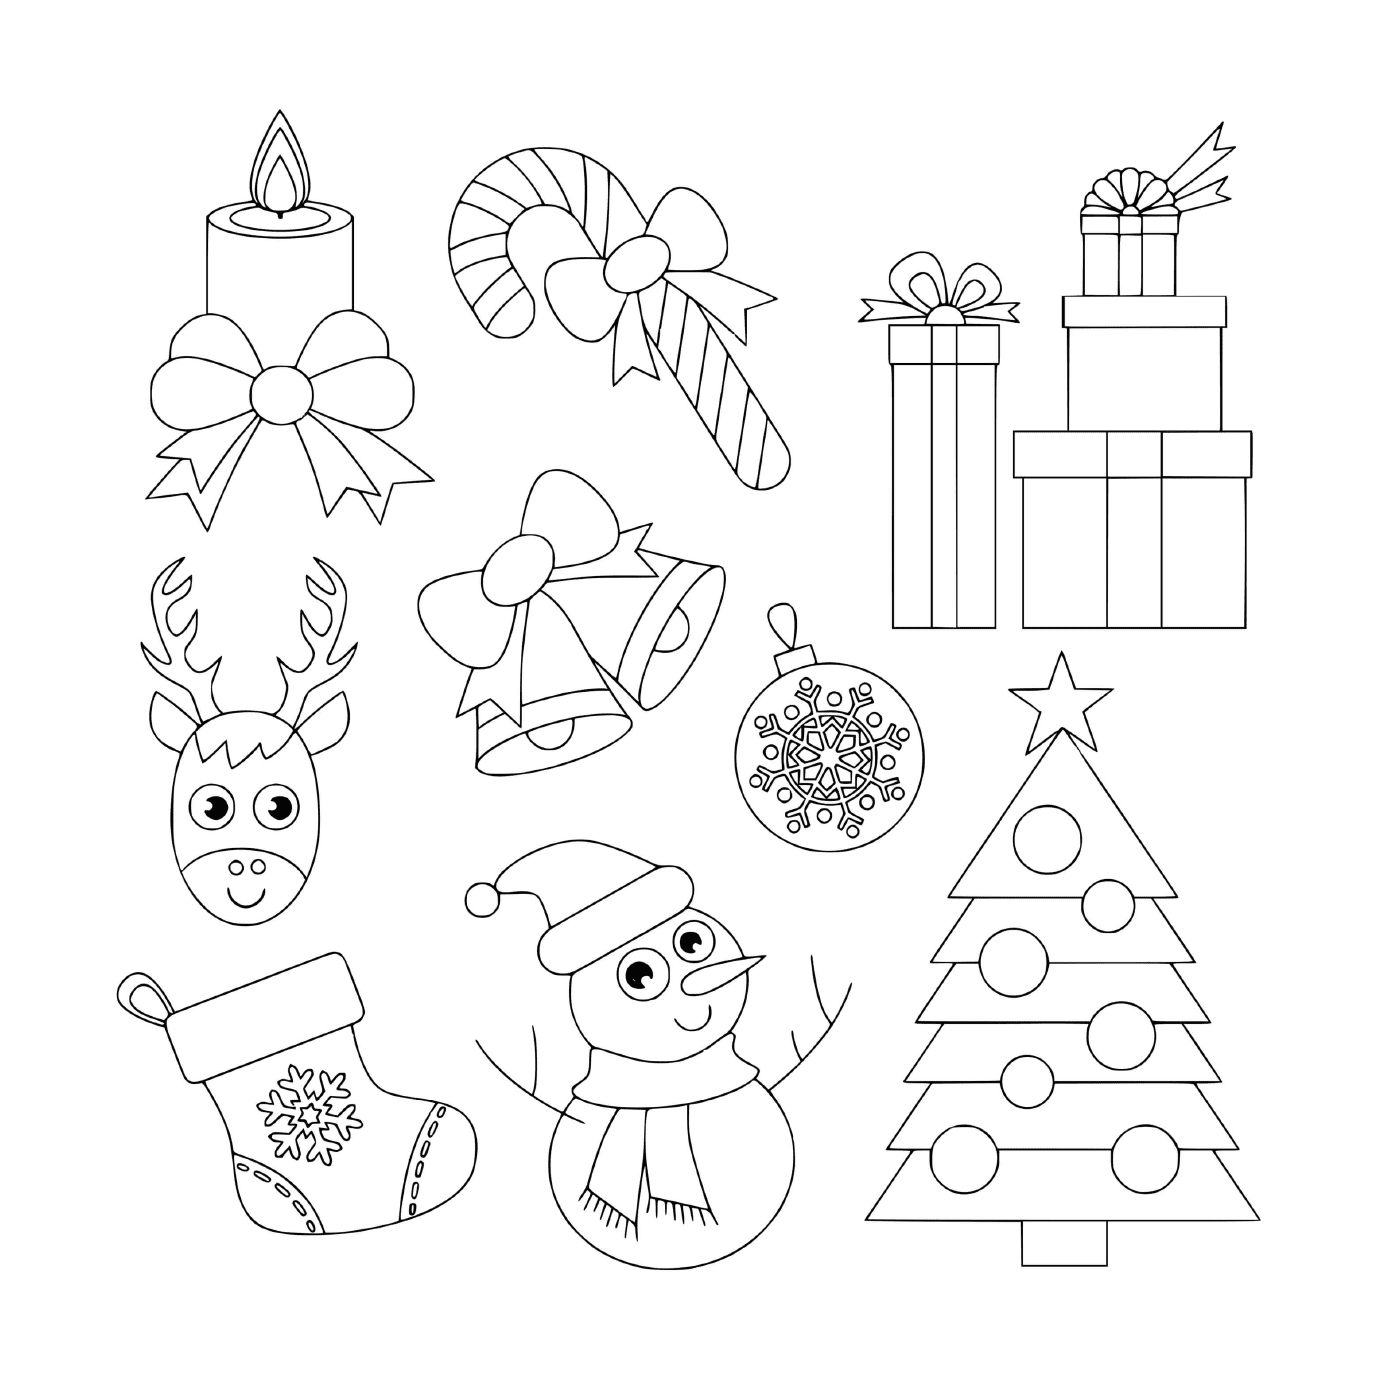  Collection of Christmas drawings for preschool and kindergarten children 